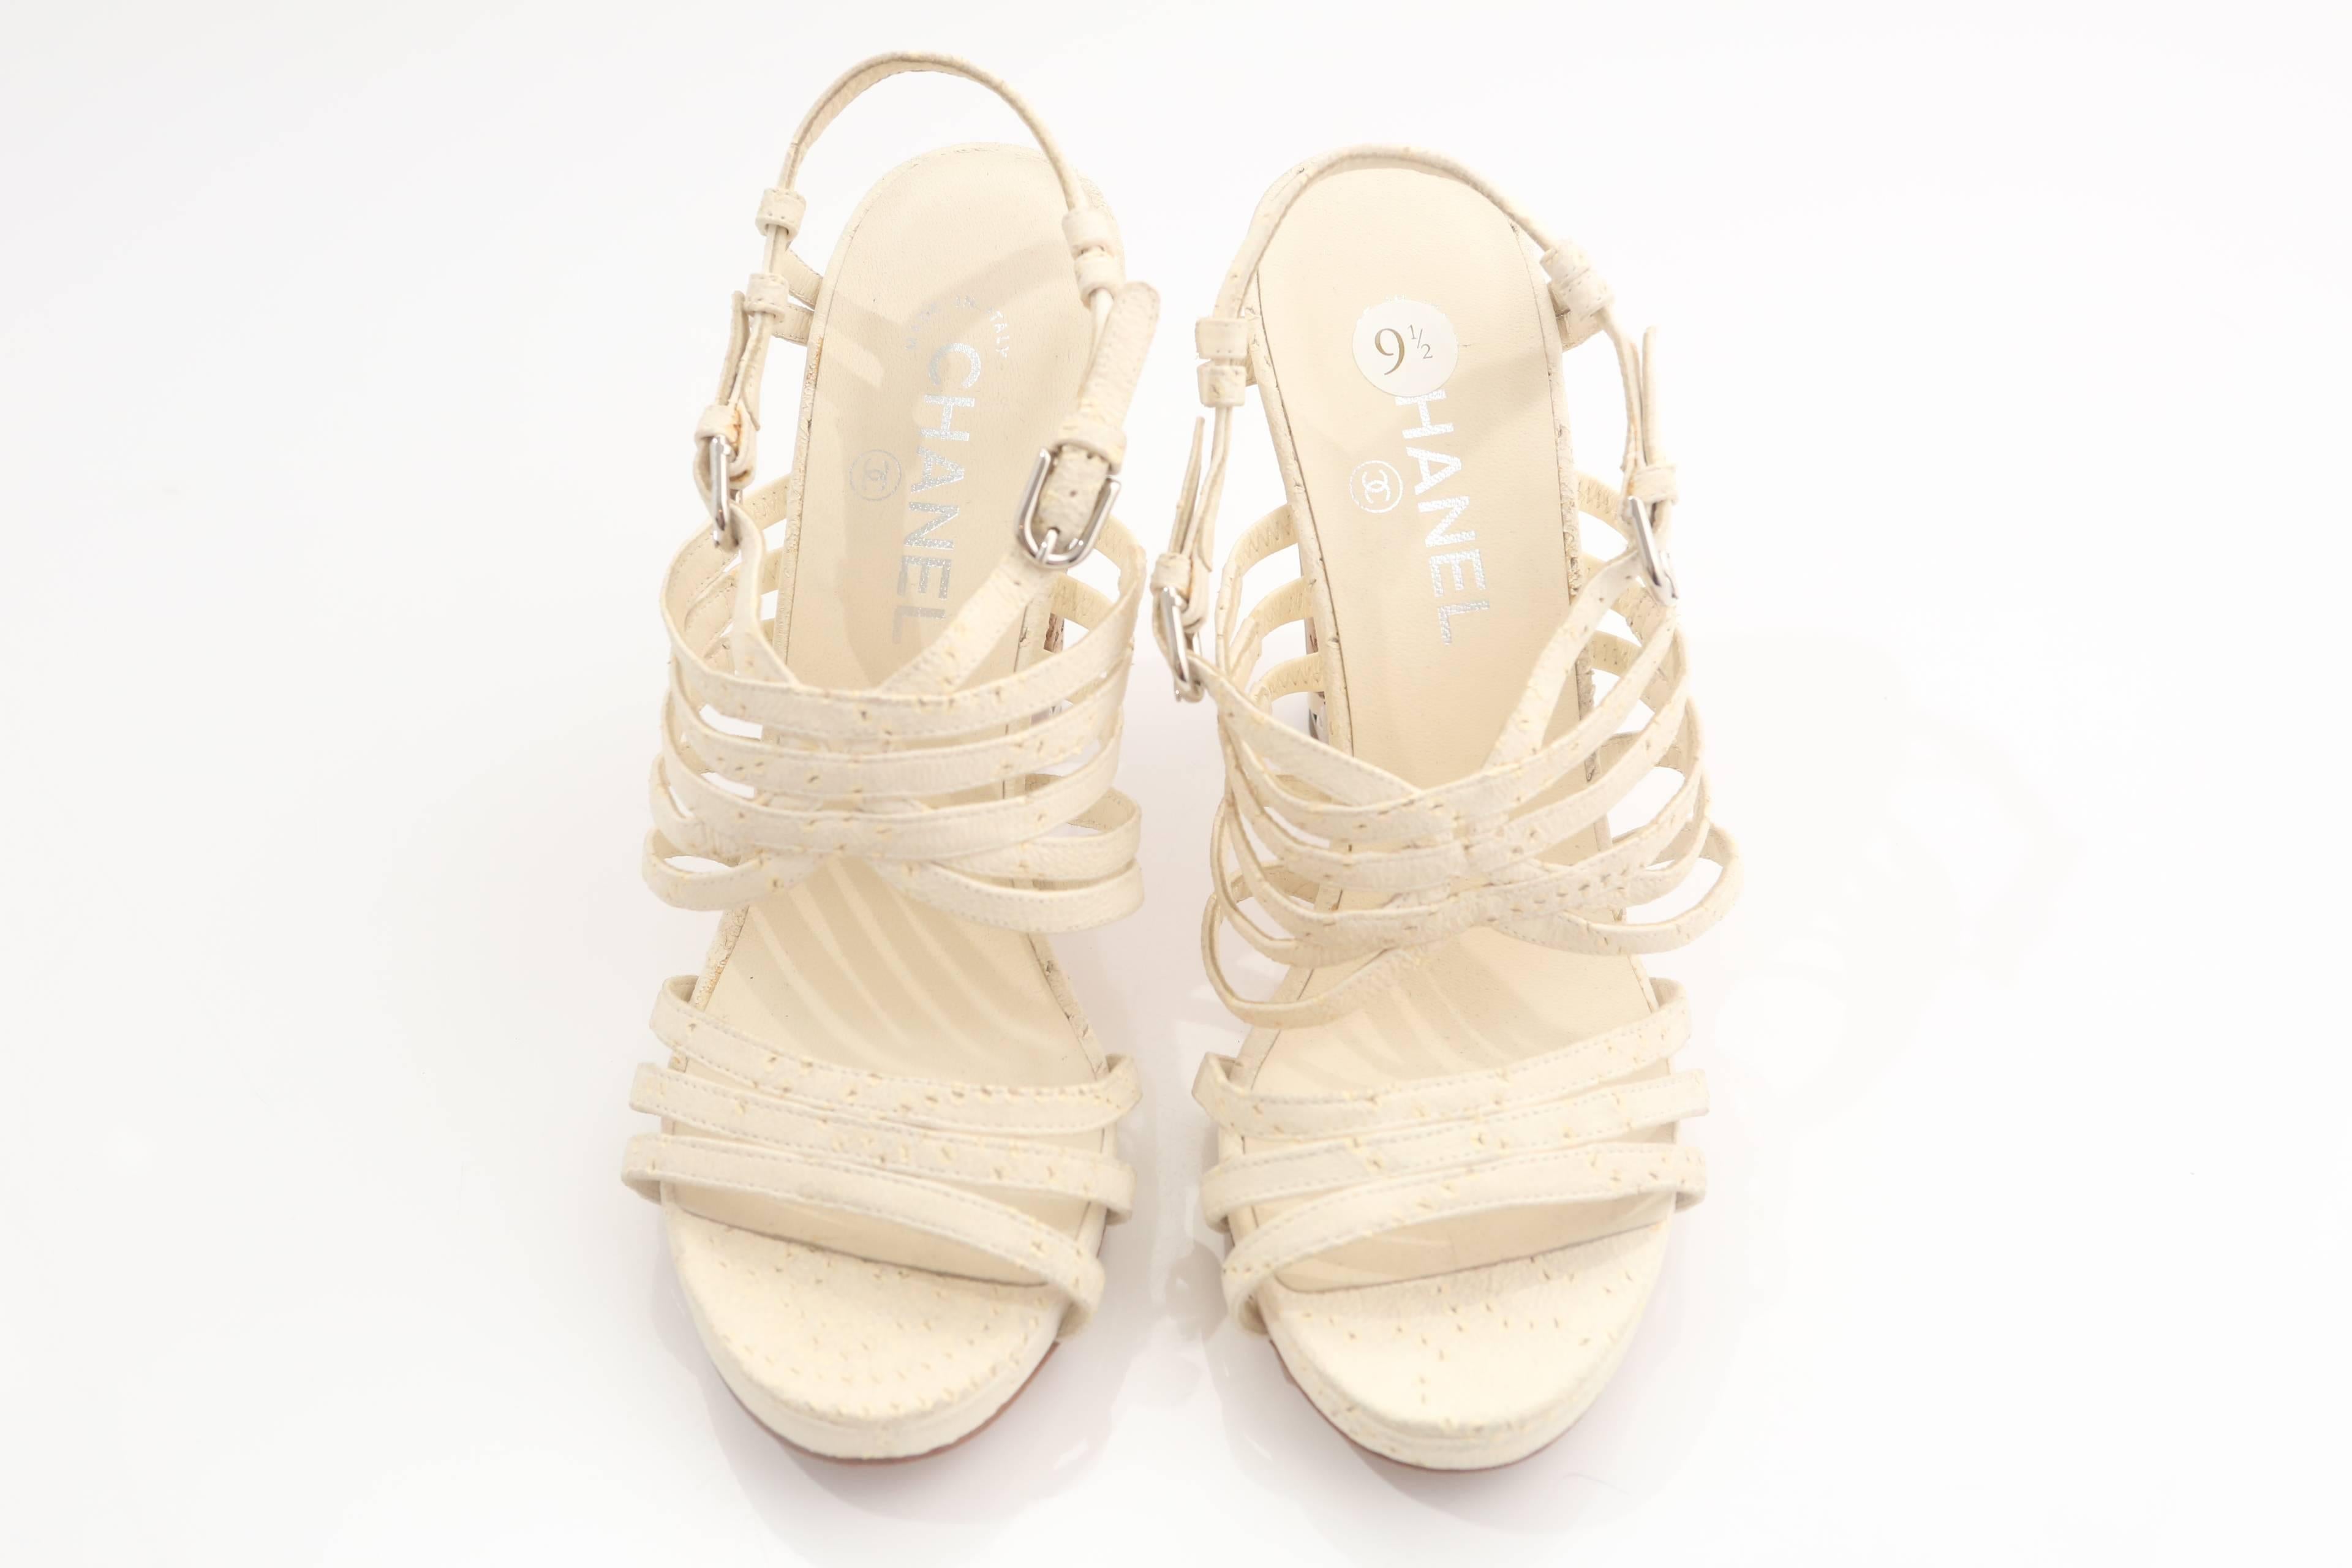 Chanel white leather sandals with cork heel and classic chain design.  Double buckle closure.

